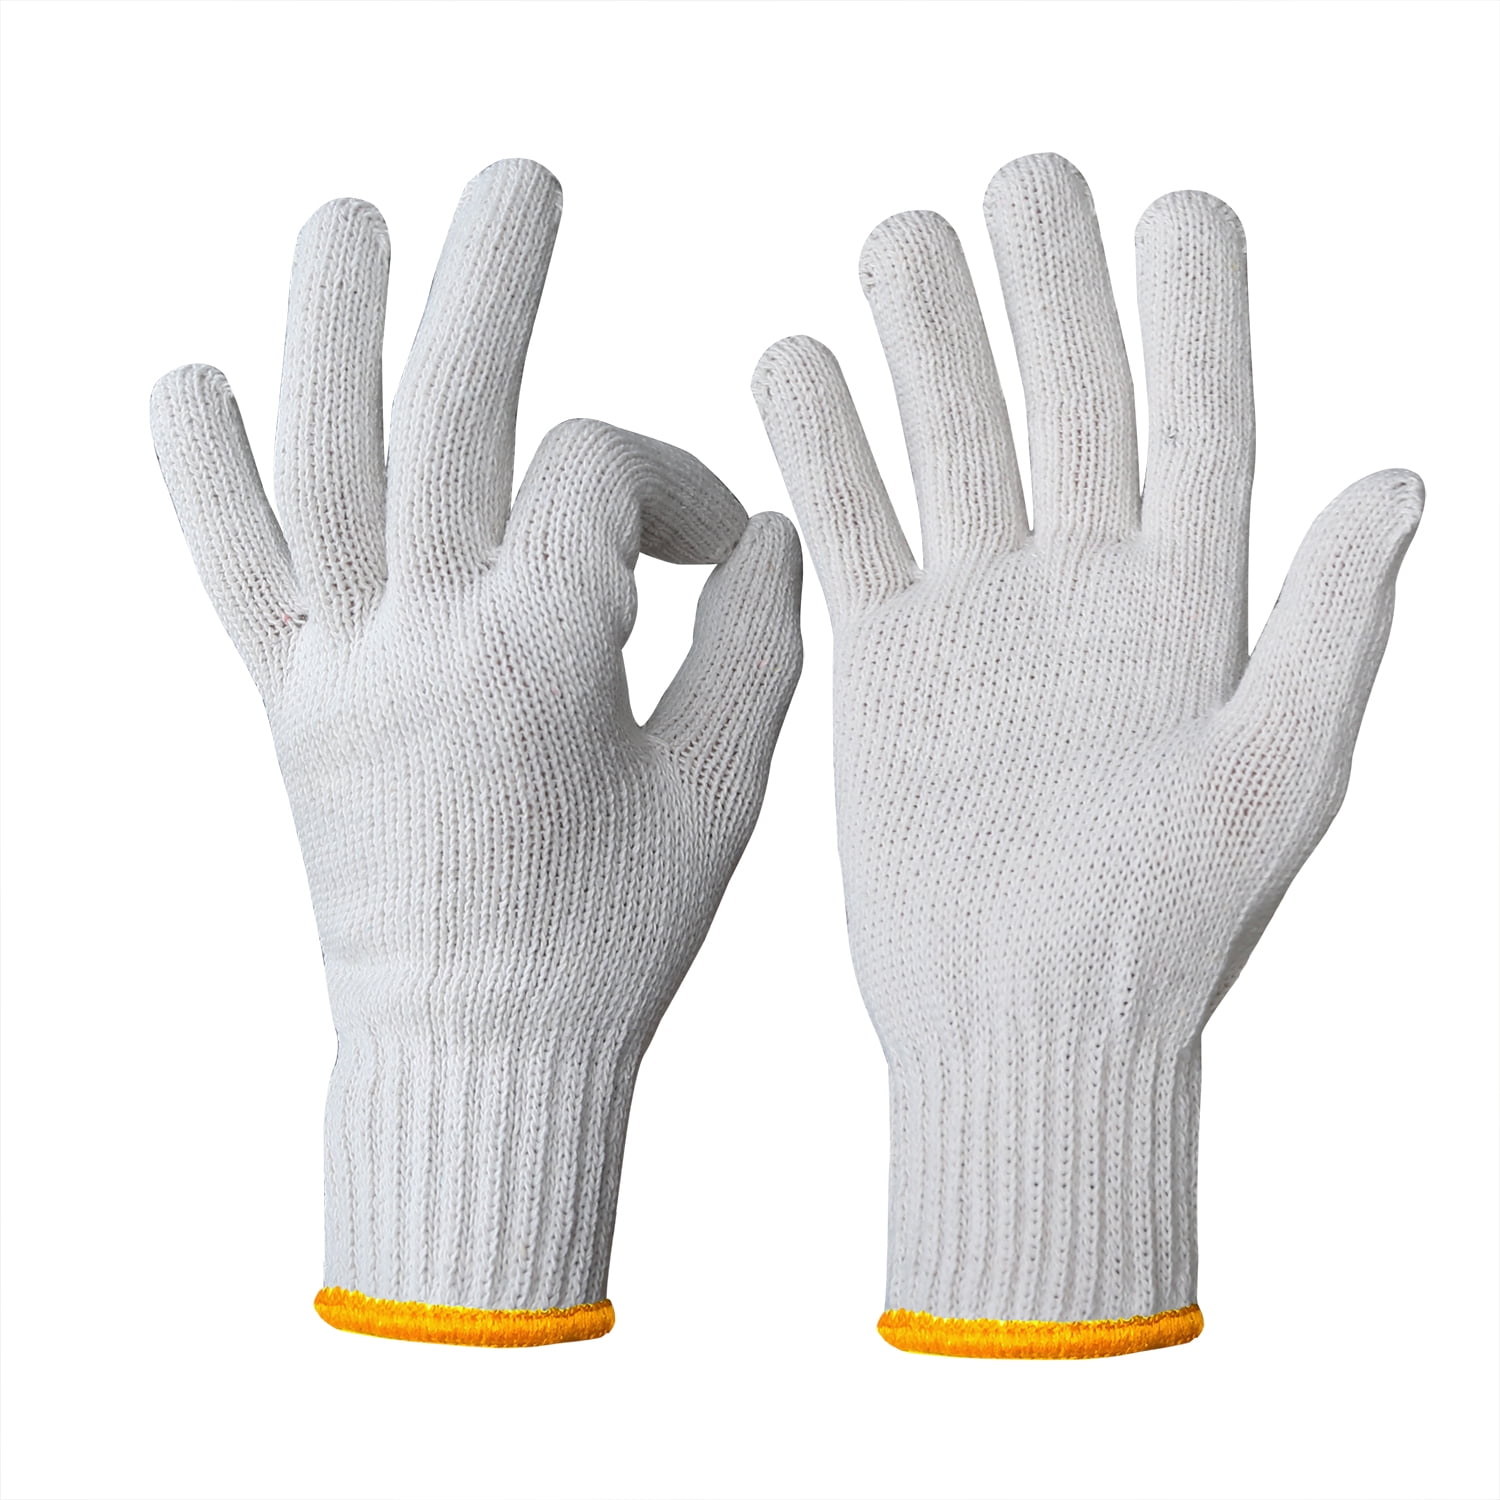 WHITE POLY COTTON STRING KNIT WORK SAFETY GLOVES High Quality =Made in Korea= 